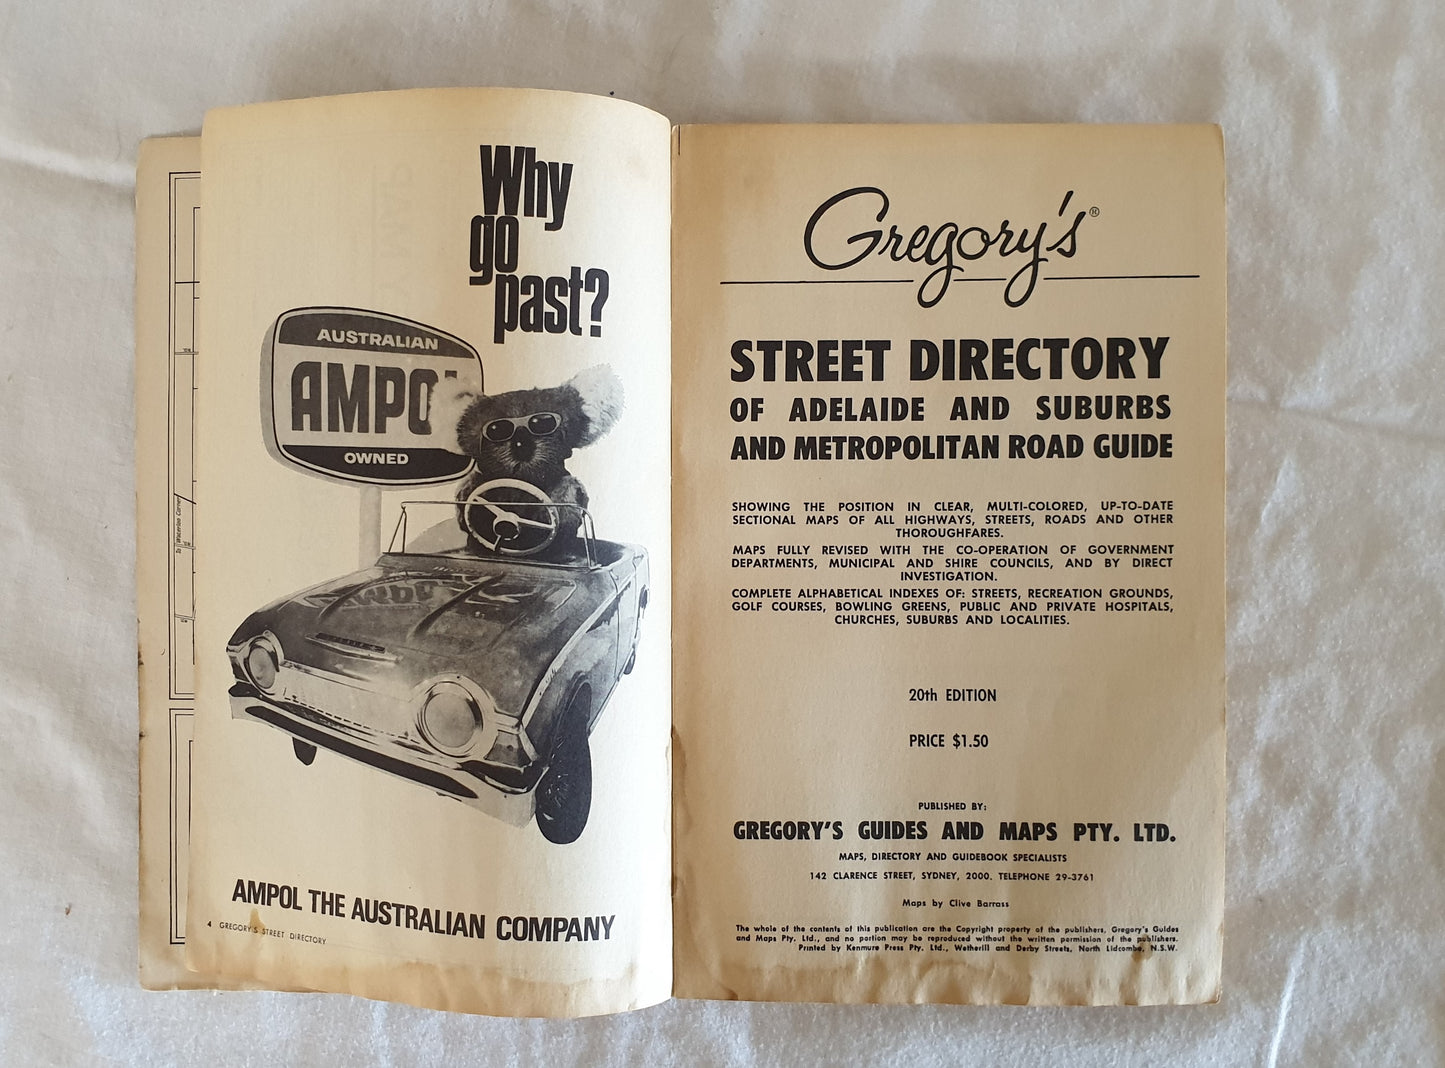 Gregory's Street Directory of Adelaide - 20th Edition